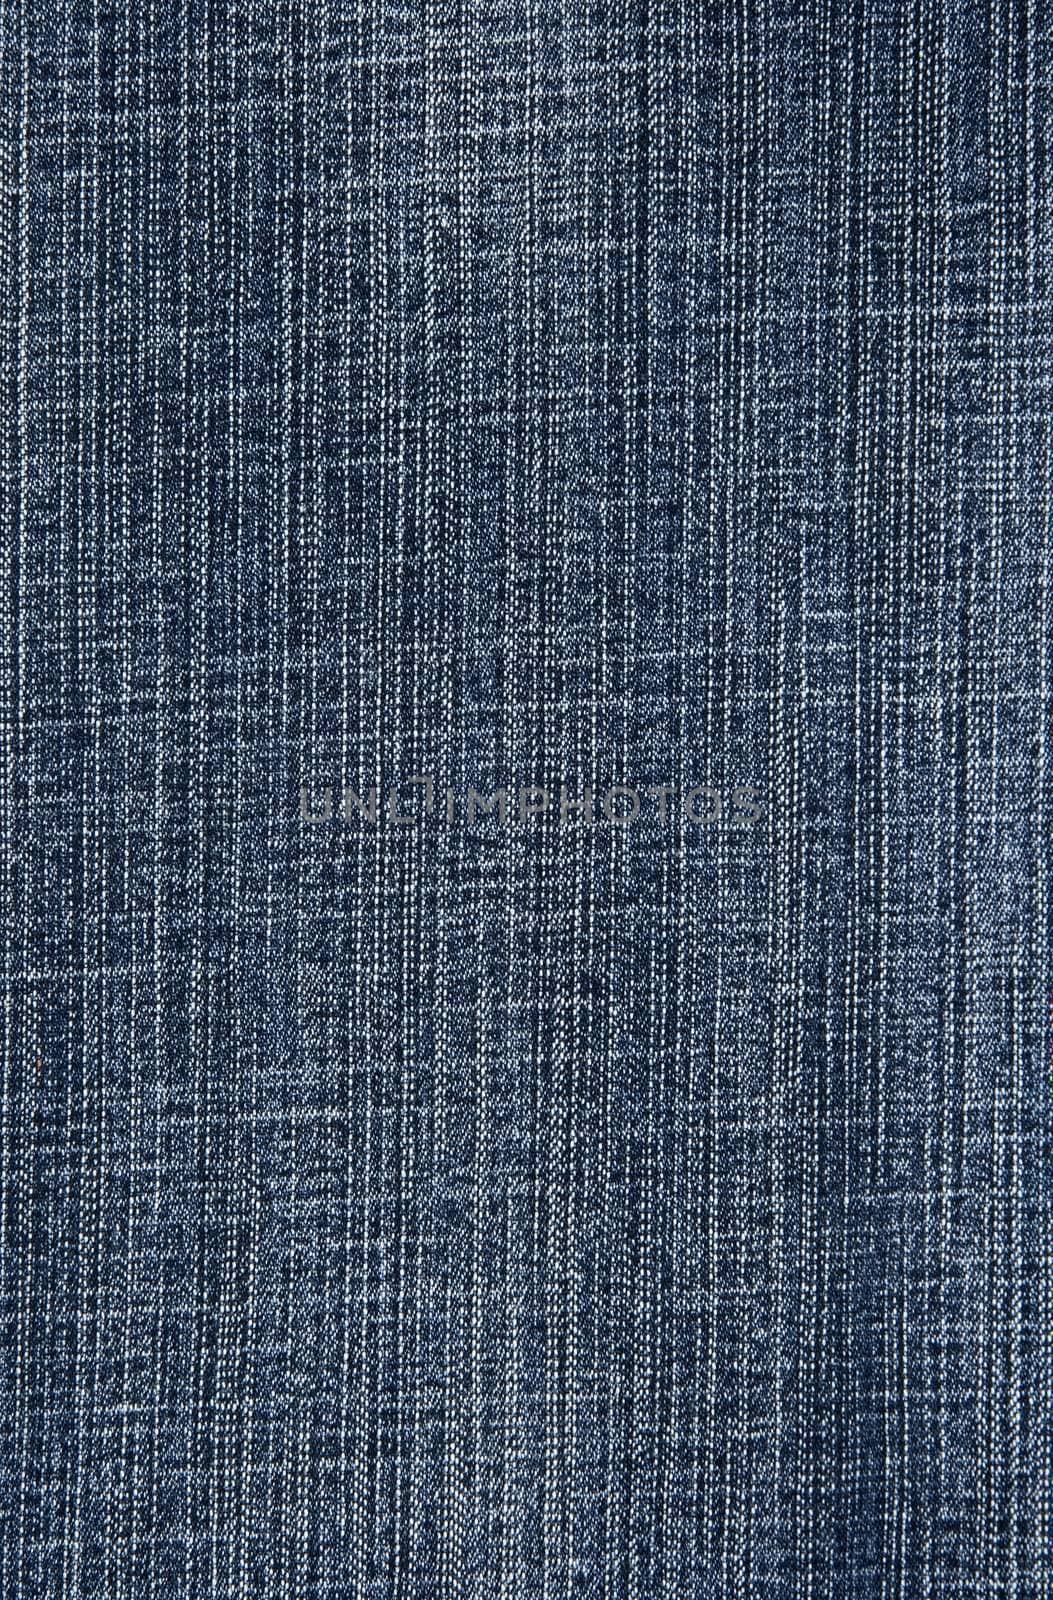 Blue denim fabric background. Close-up of jeans.